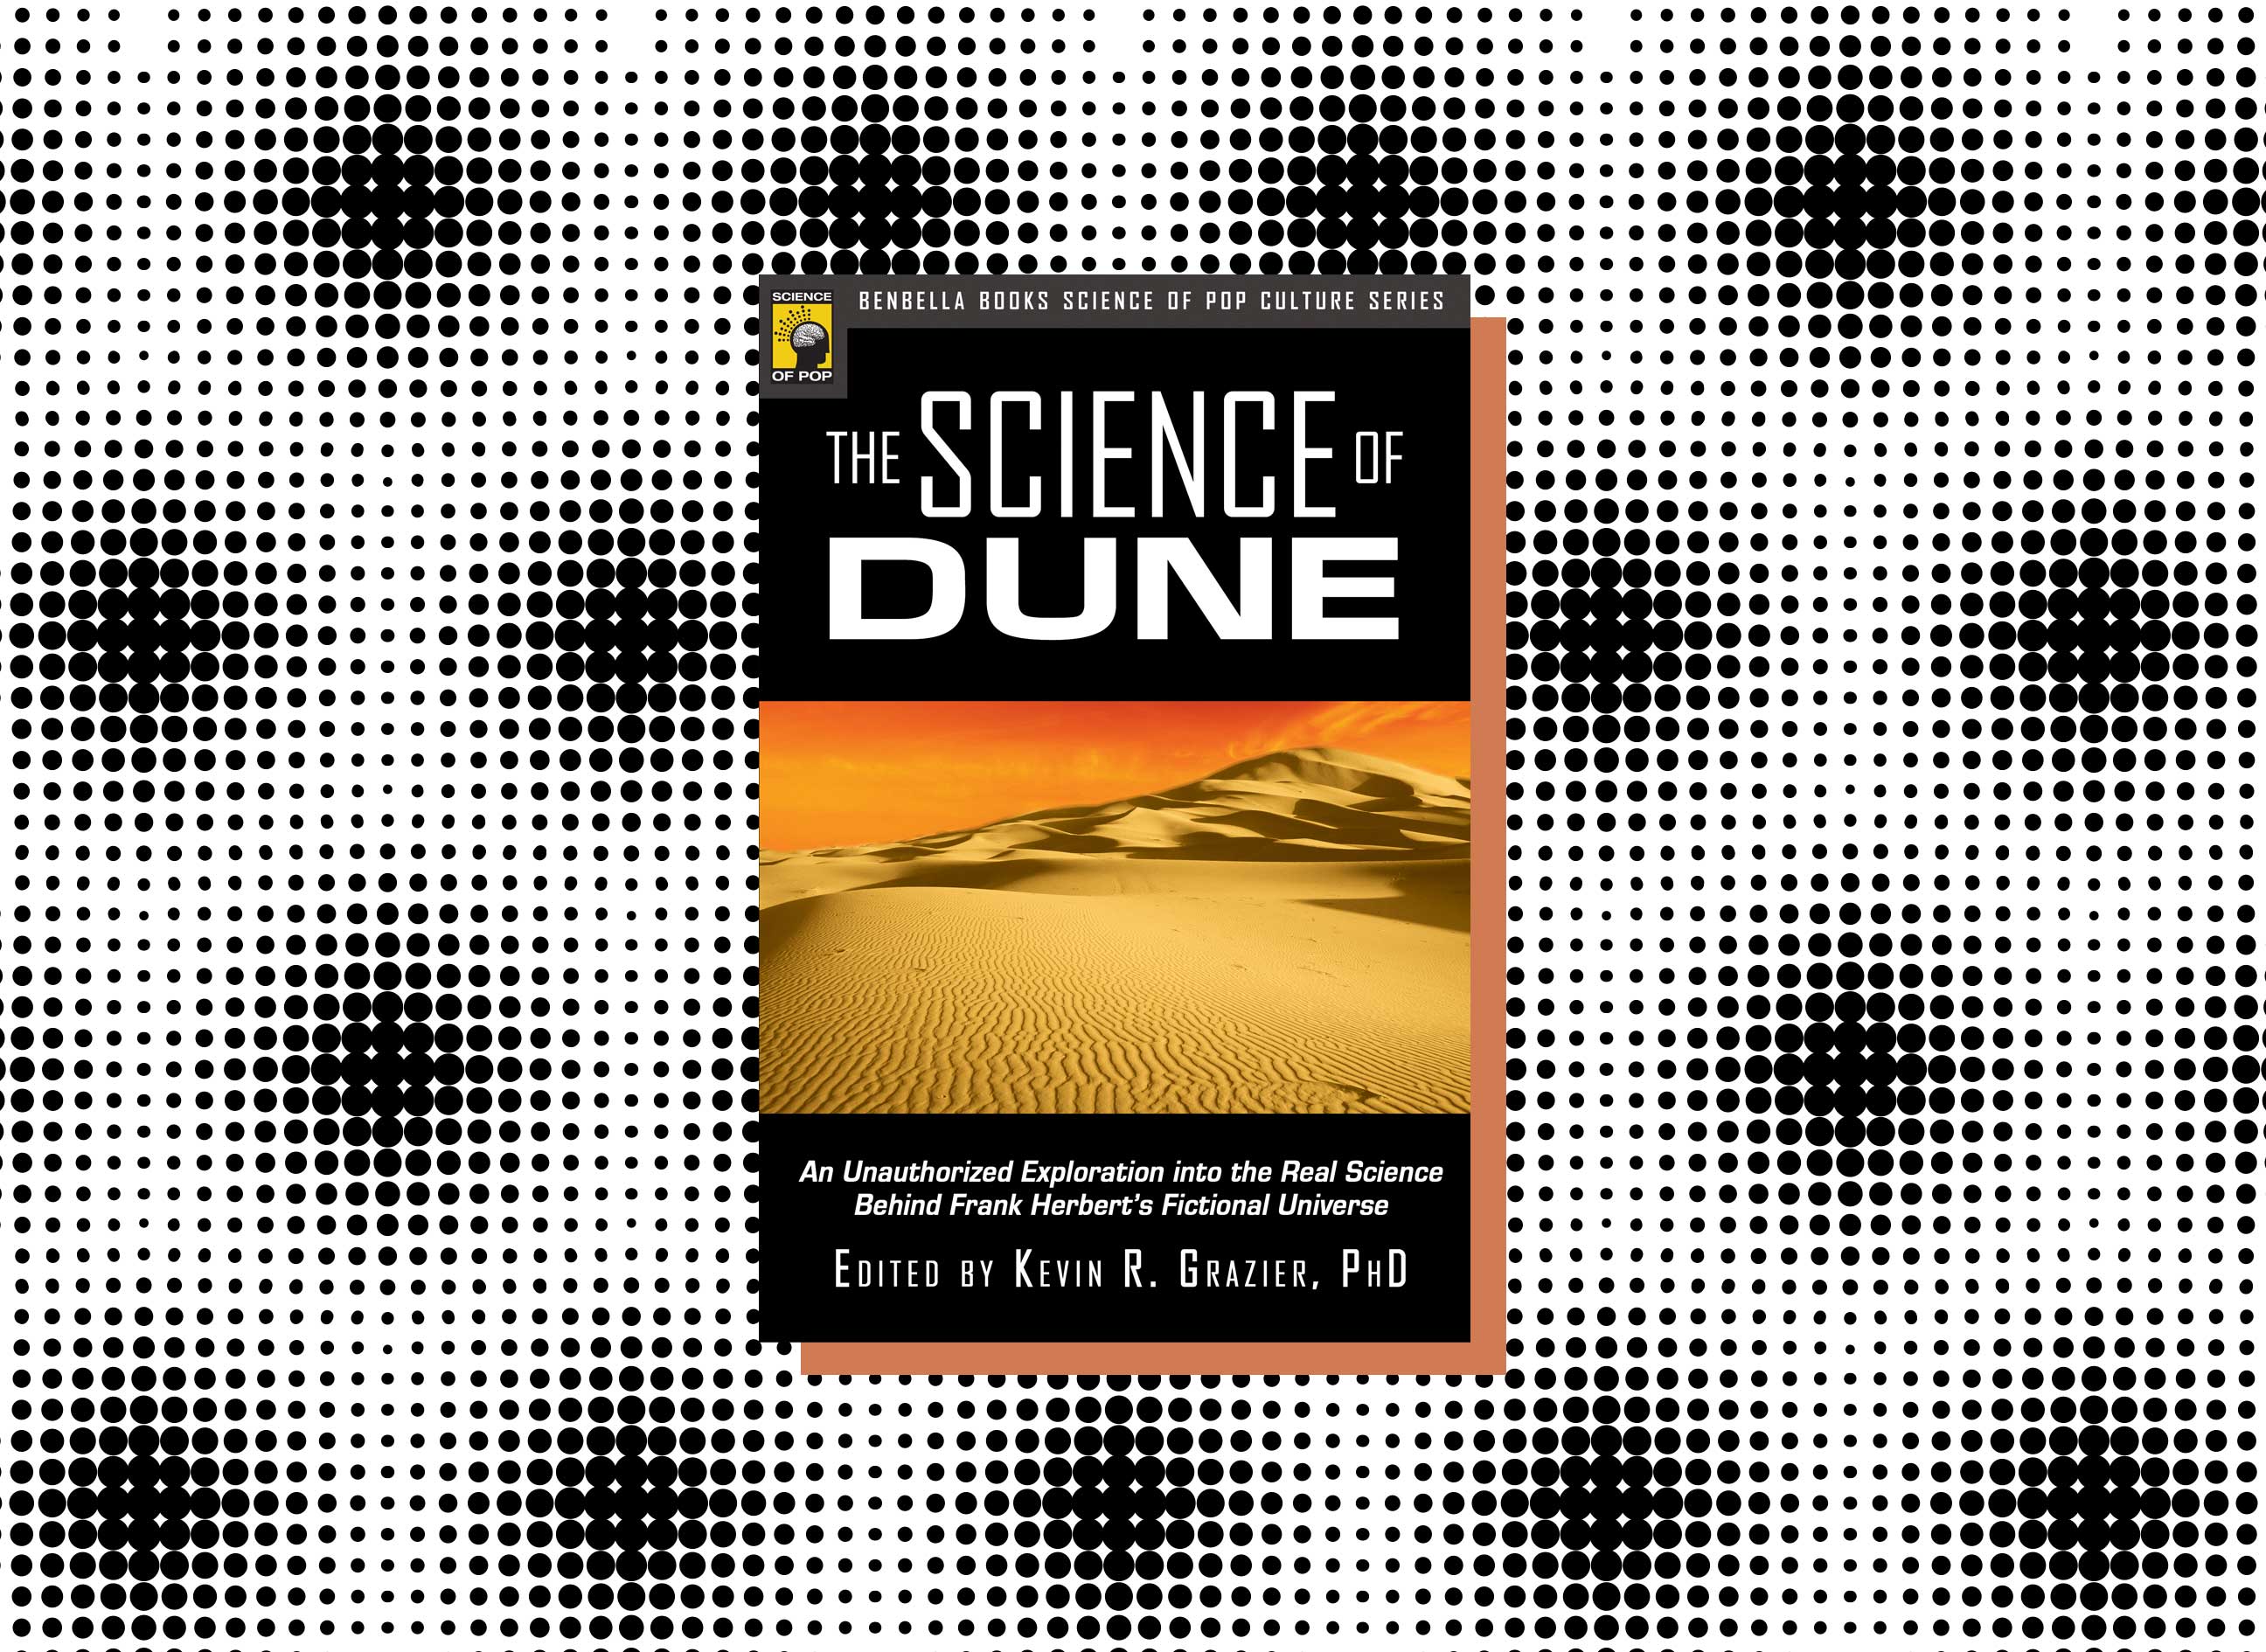 The Science of Dune